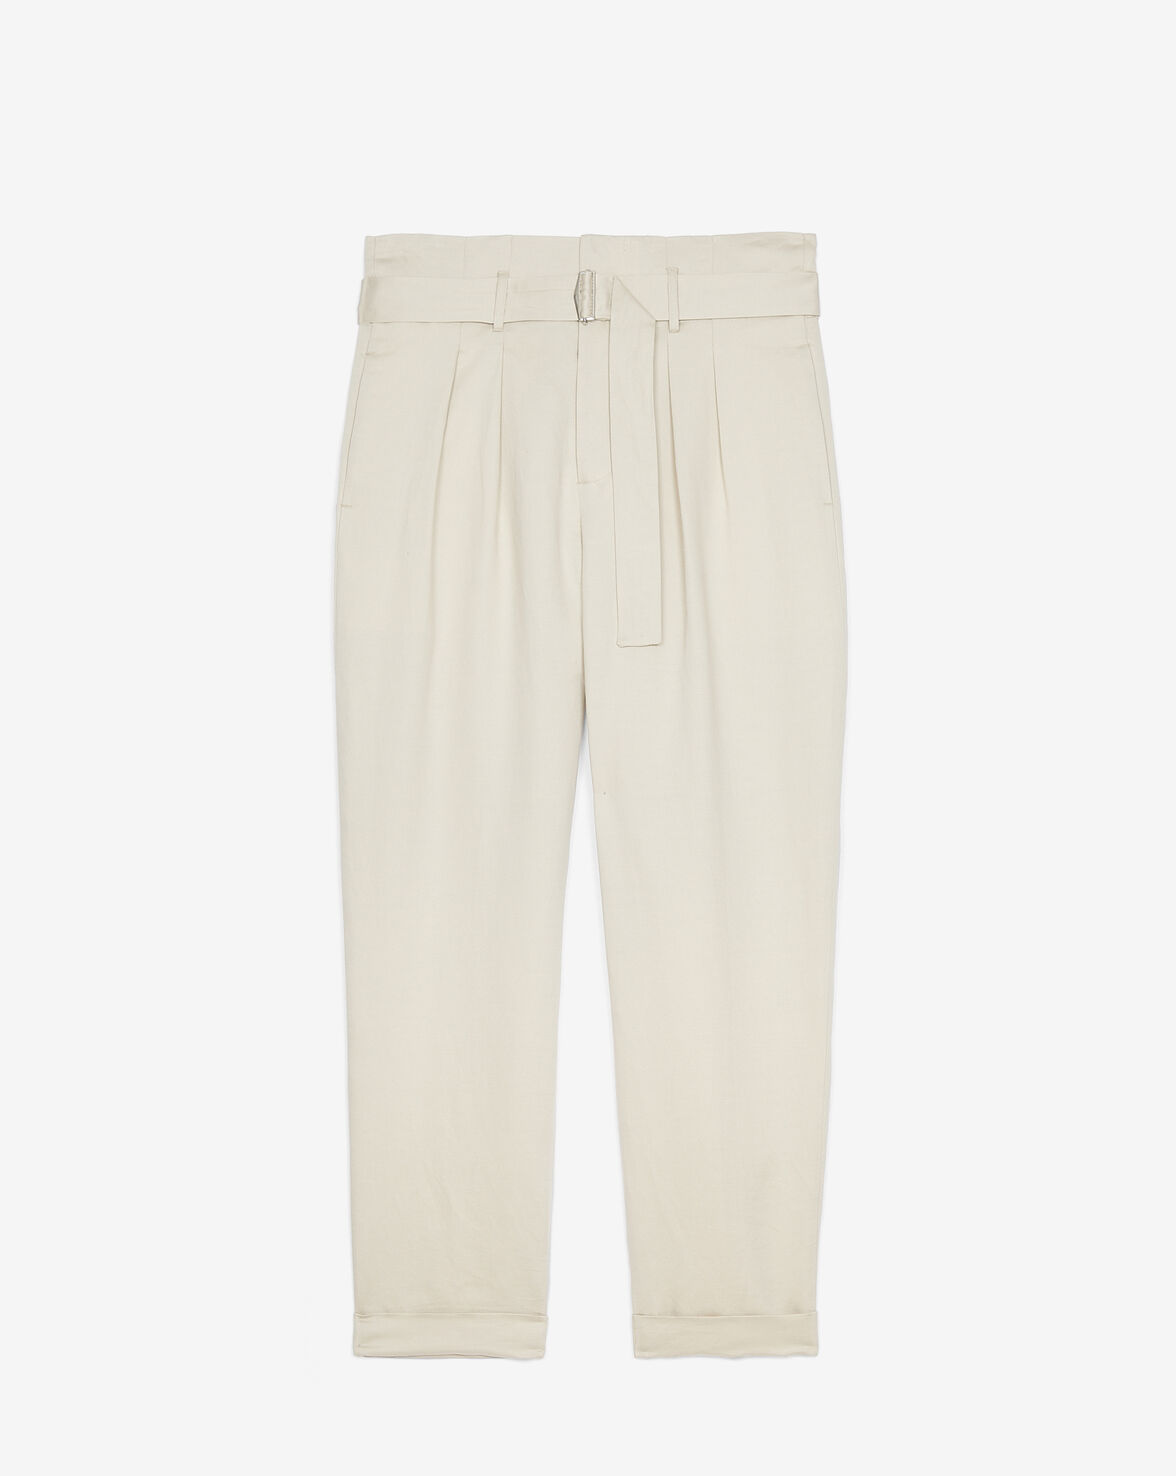 Iro Thimoty Belted Pants In Beige